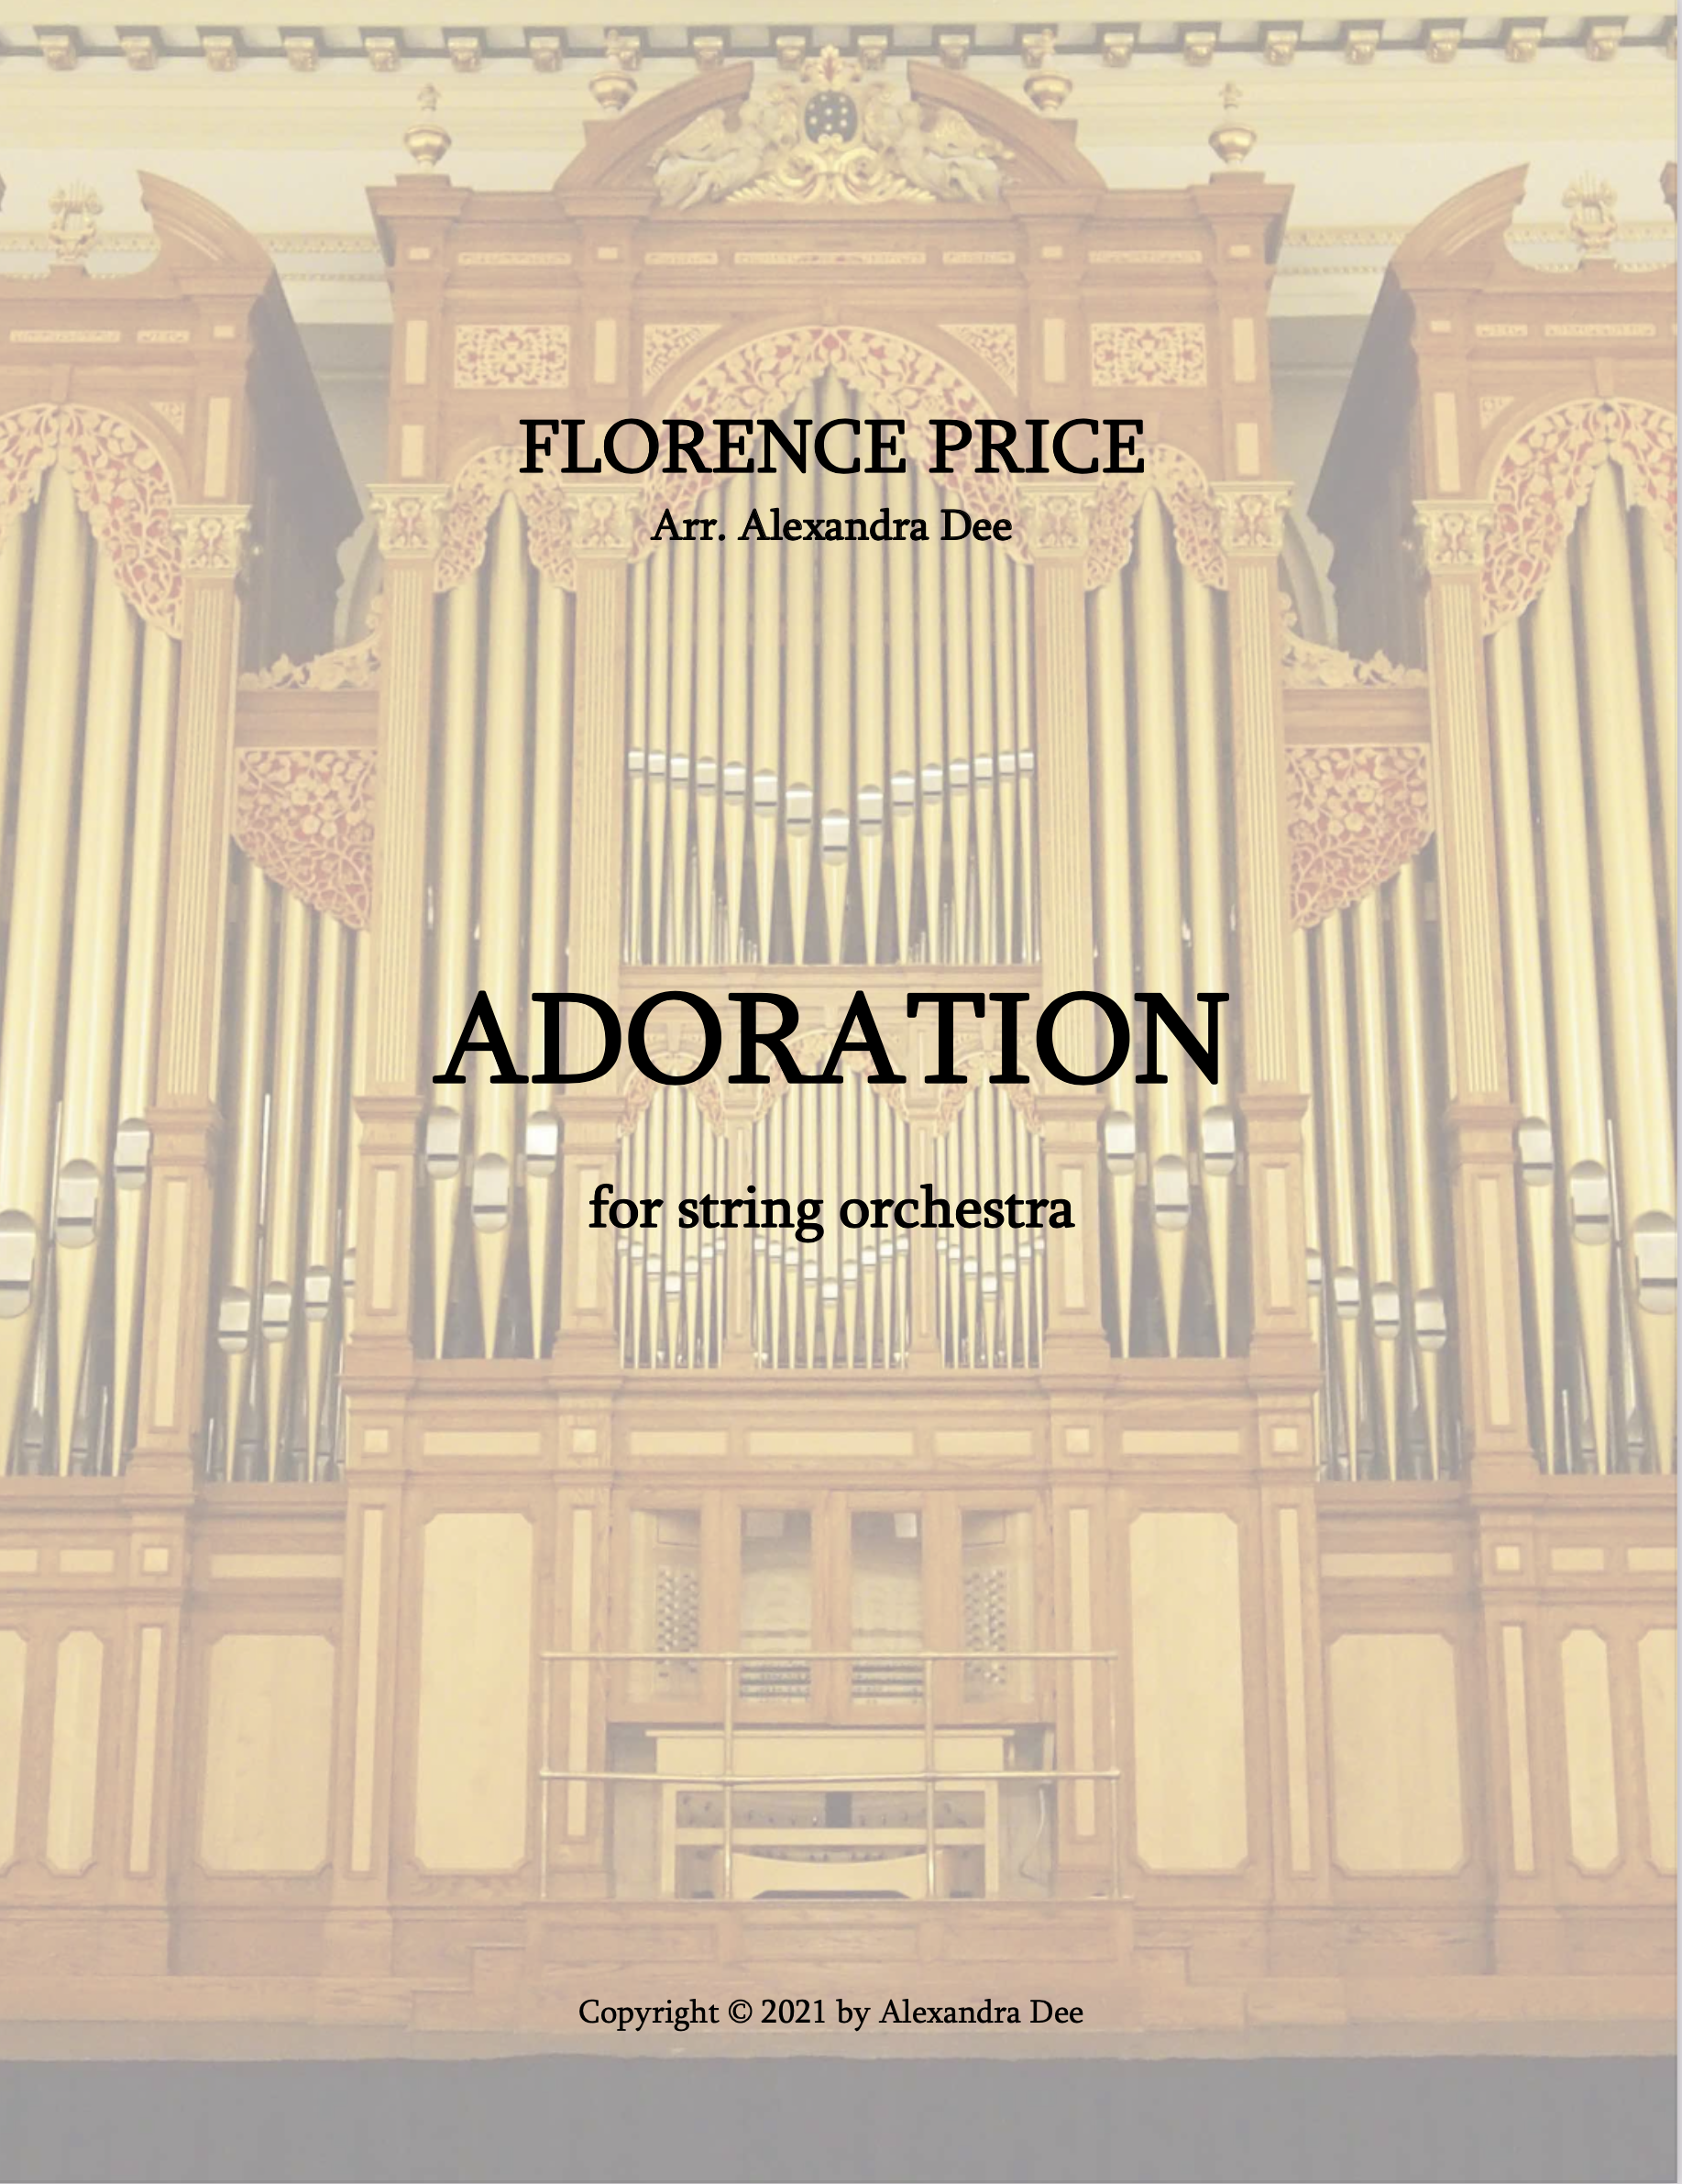 Adoration (Score Only String Orchestra Version) by Price, arr. Alexandra Dee